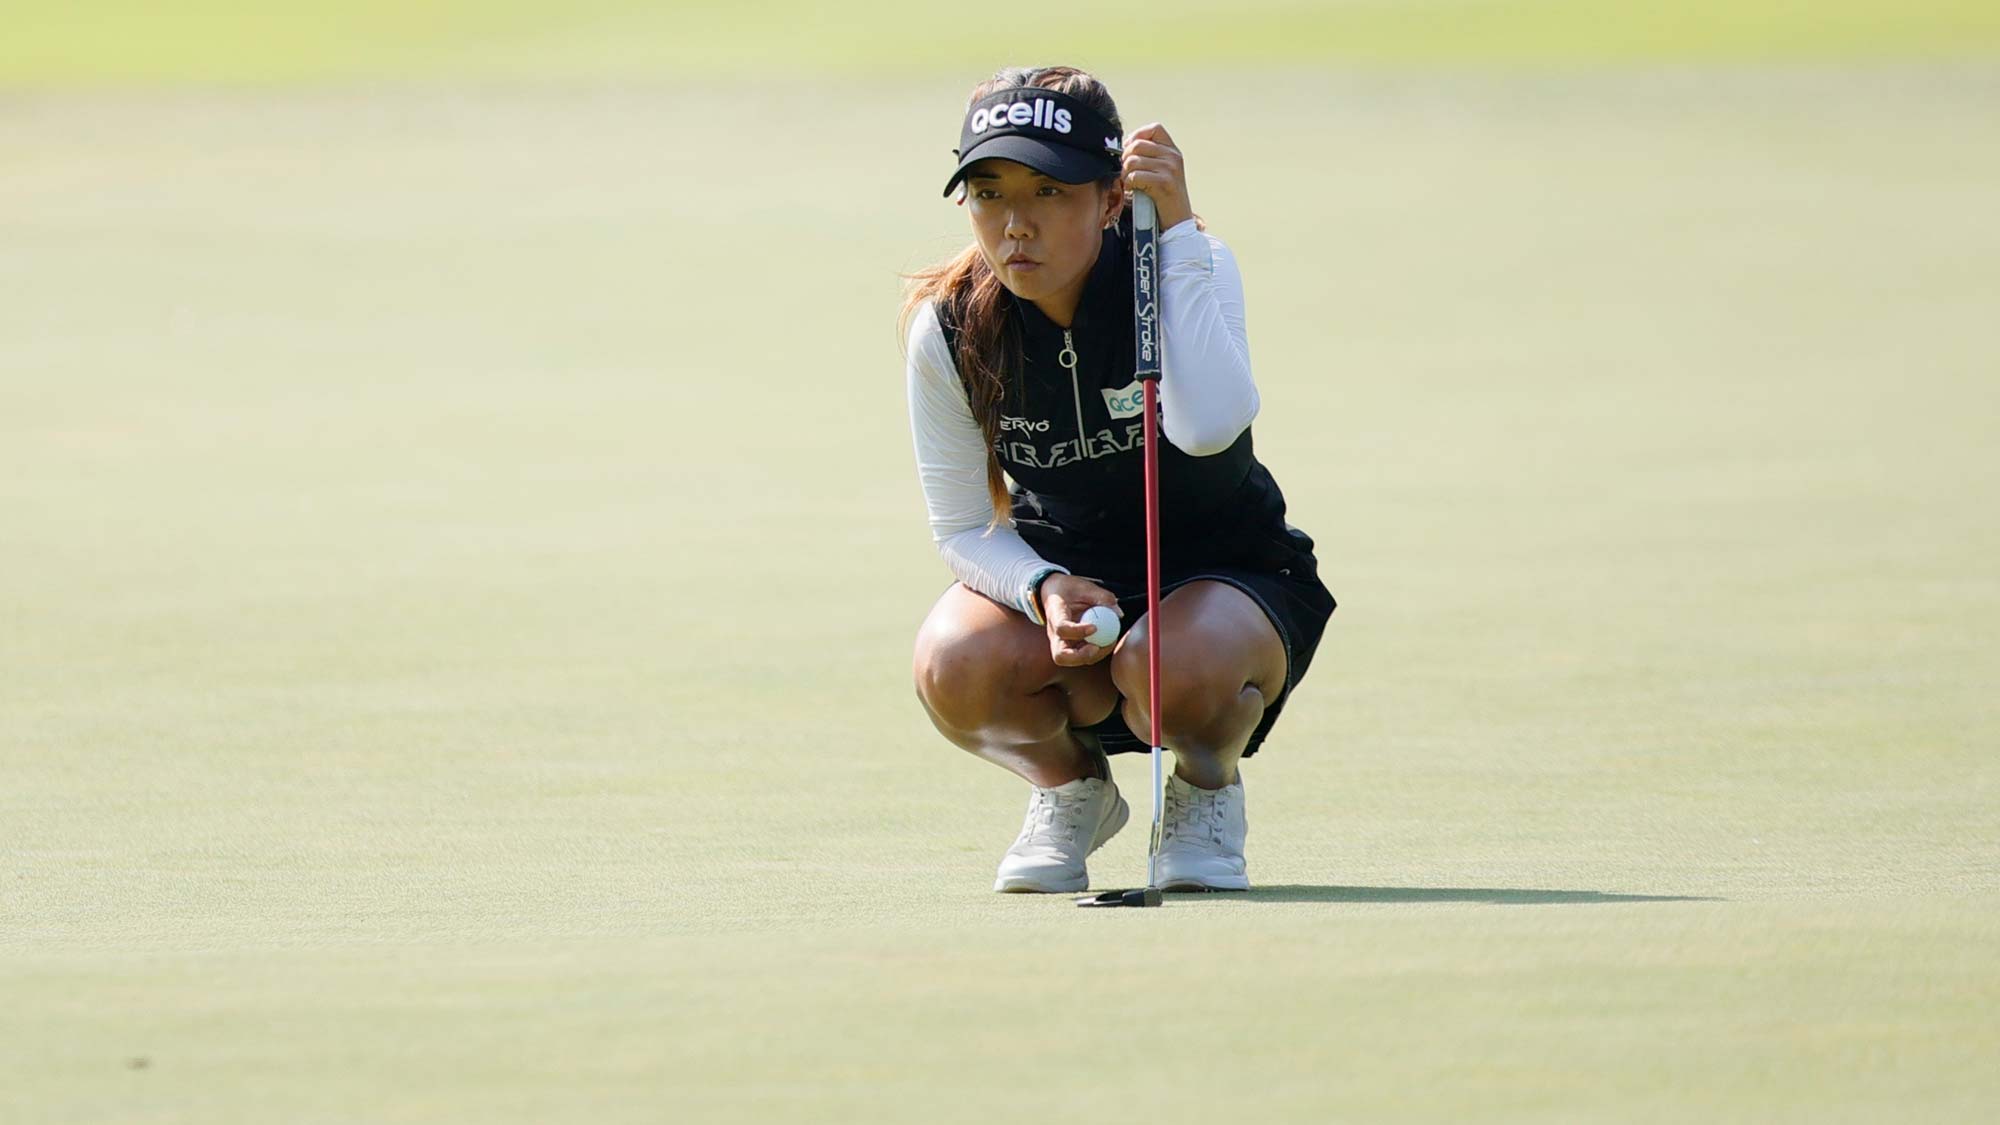 Jenny Shin of South Korea lines up her putt on the eighth green during the Final round of the Walmart NW Arkansas Championship presented by P&G at Pinnacle Country Club